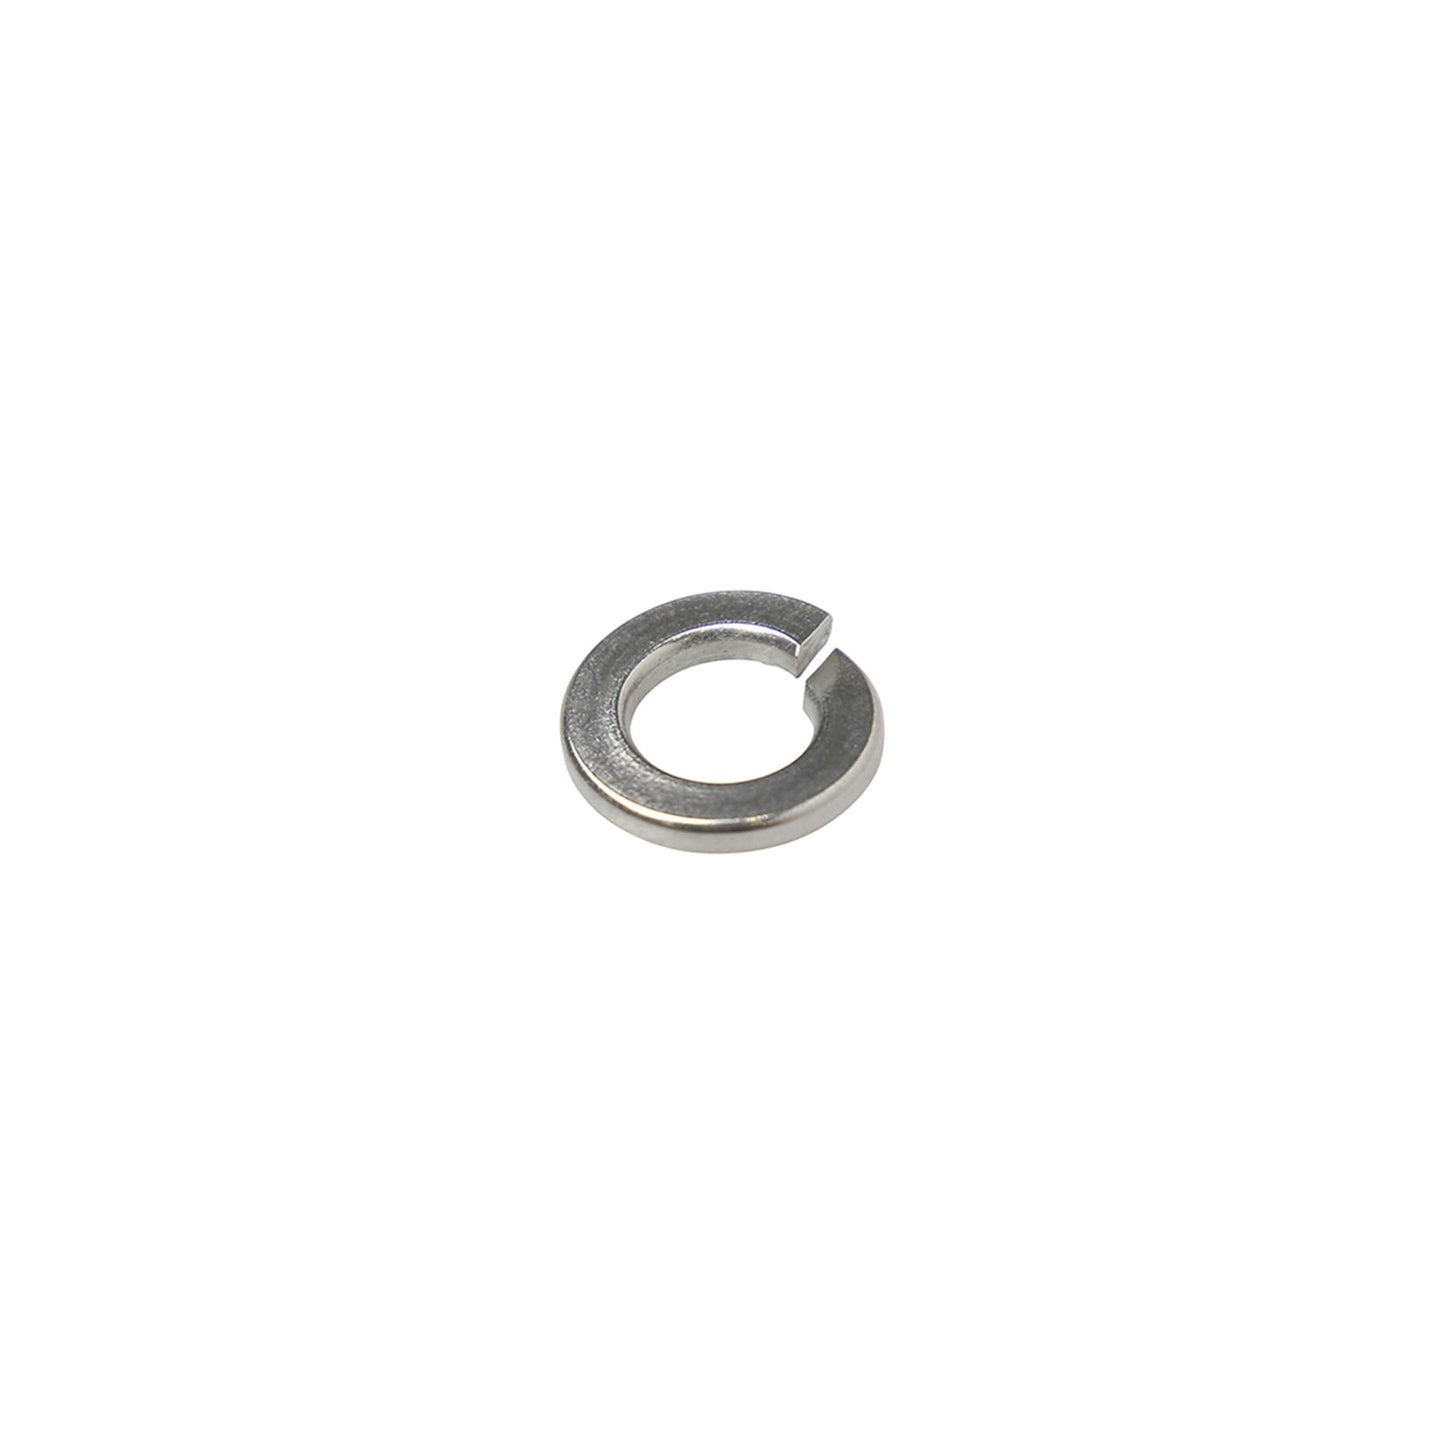 3/8" Conquest Split Lock Washer - 316 Stainless Steel